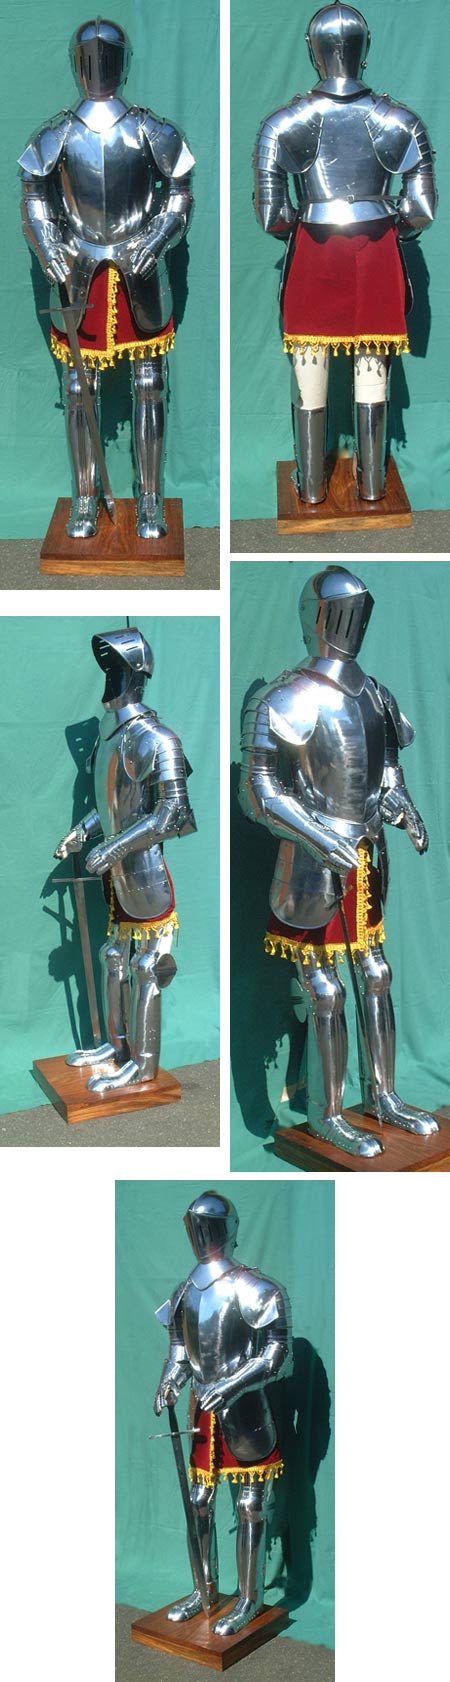 European Suit Of Armour - early 16th Century